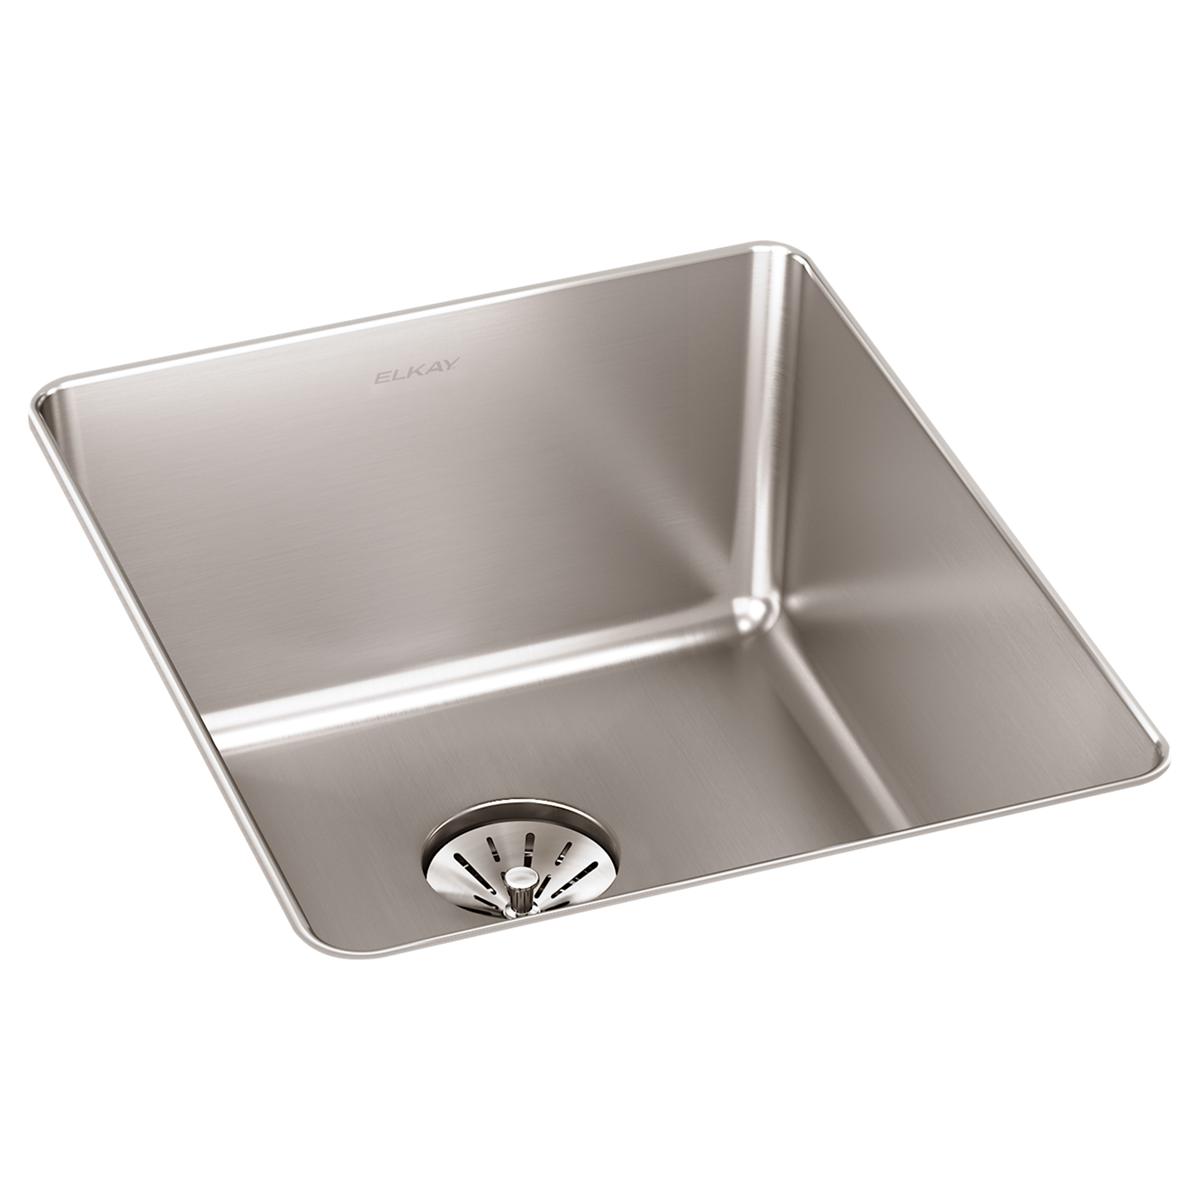 Elkay Lustertone Iconix 16 Gauge Stainless Steel 16" x 18-1/2" x 8", Single Bowl Undermount Sink with Perfect Drain